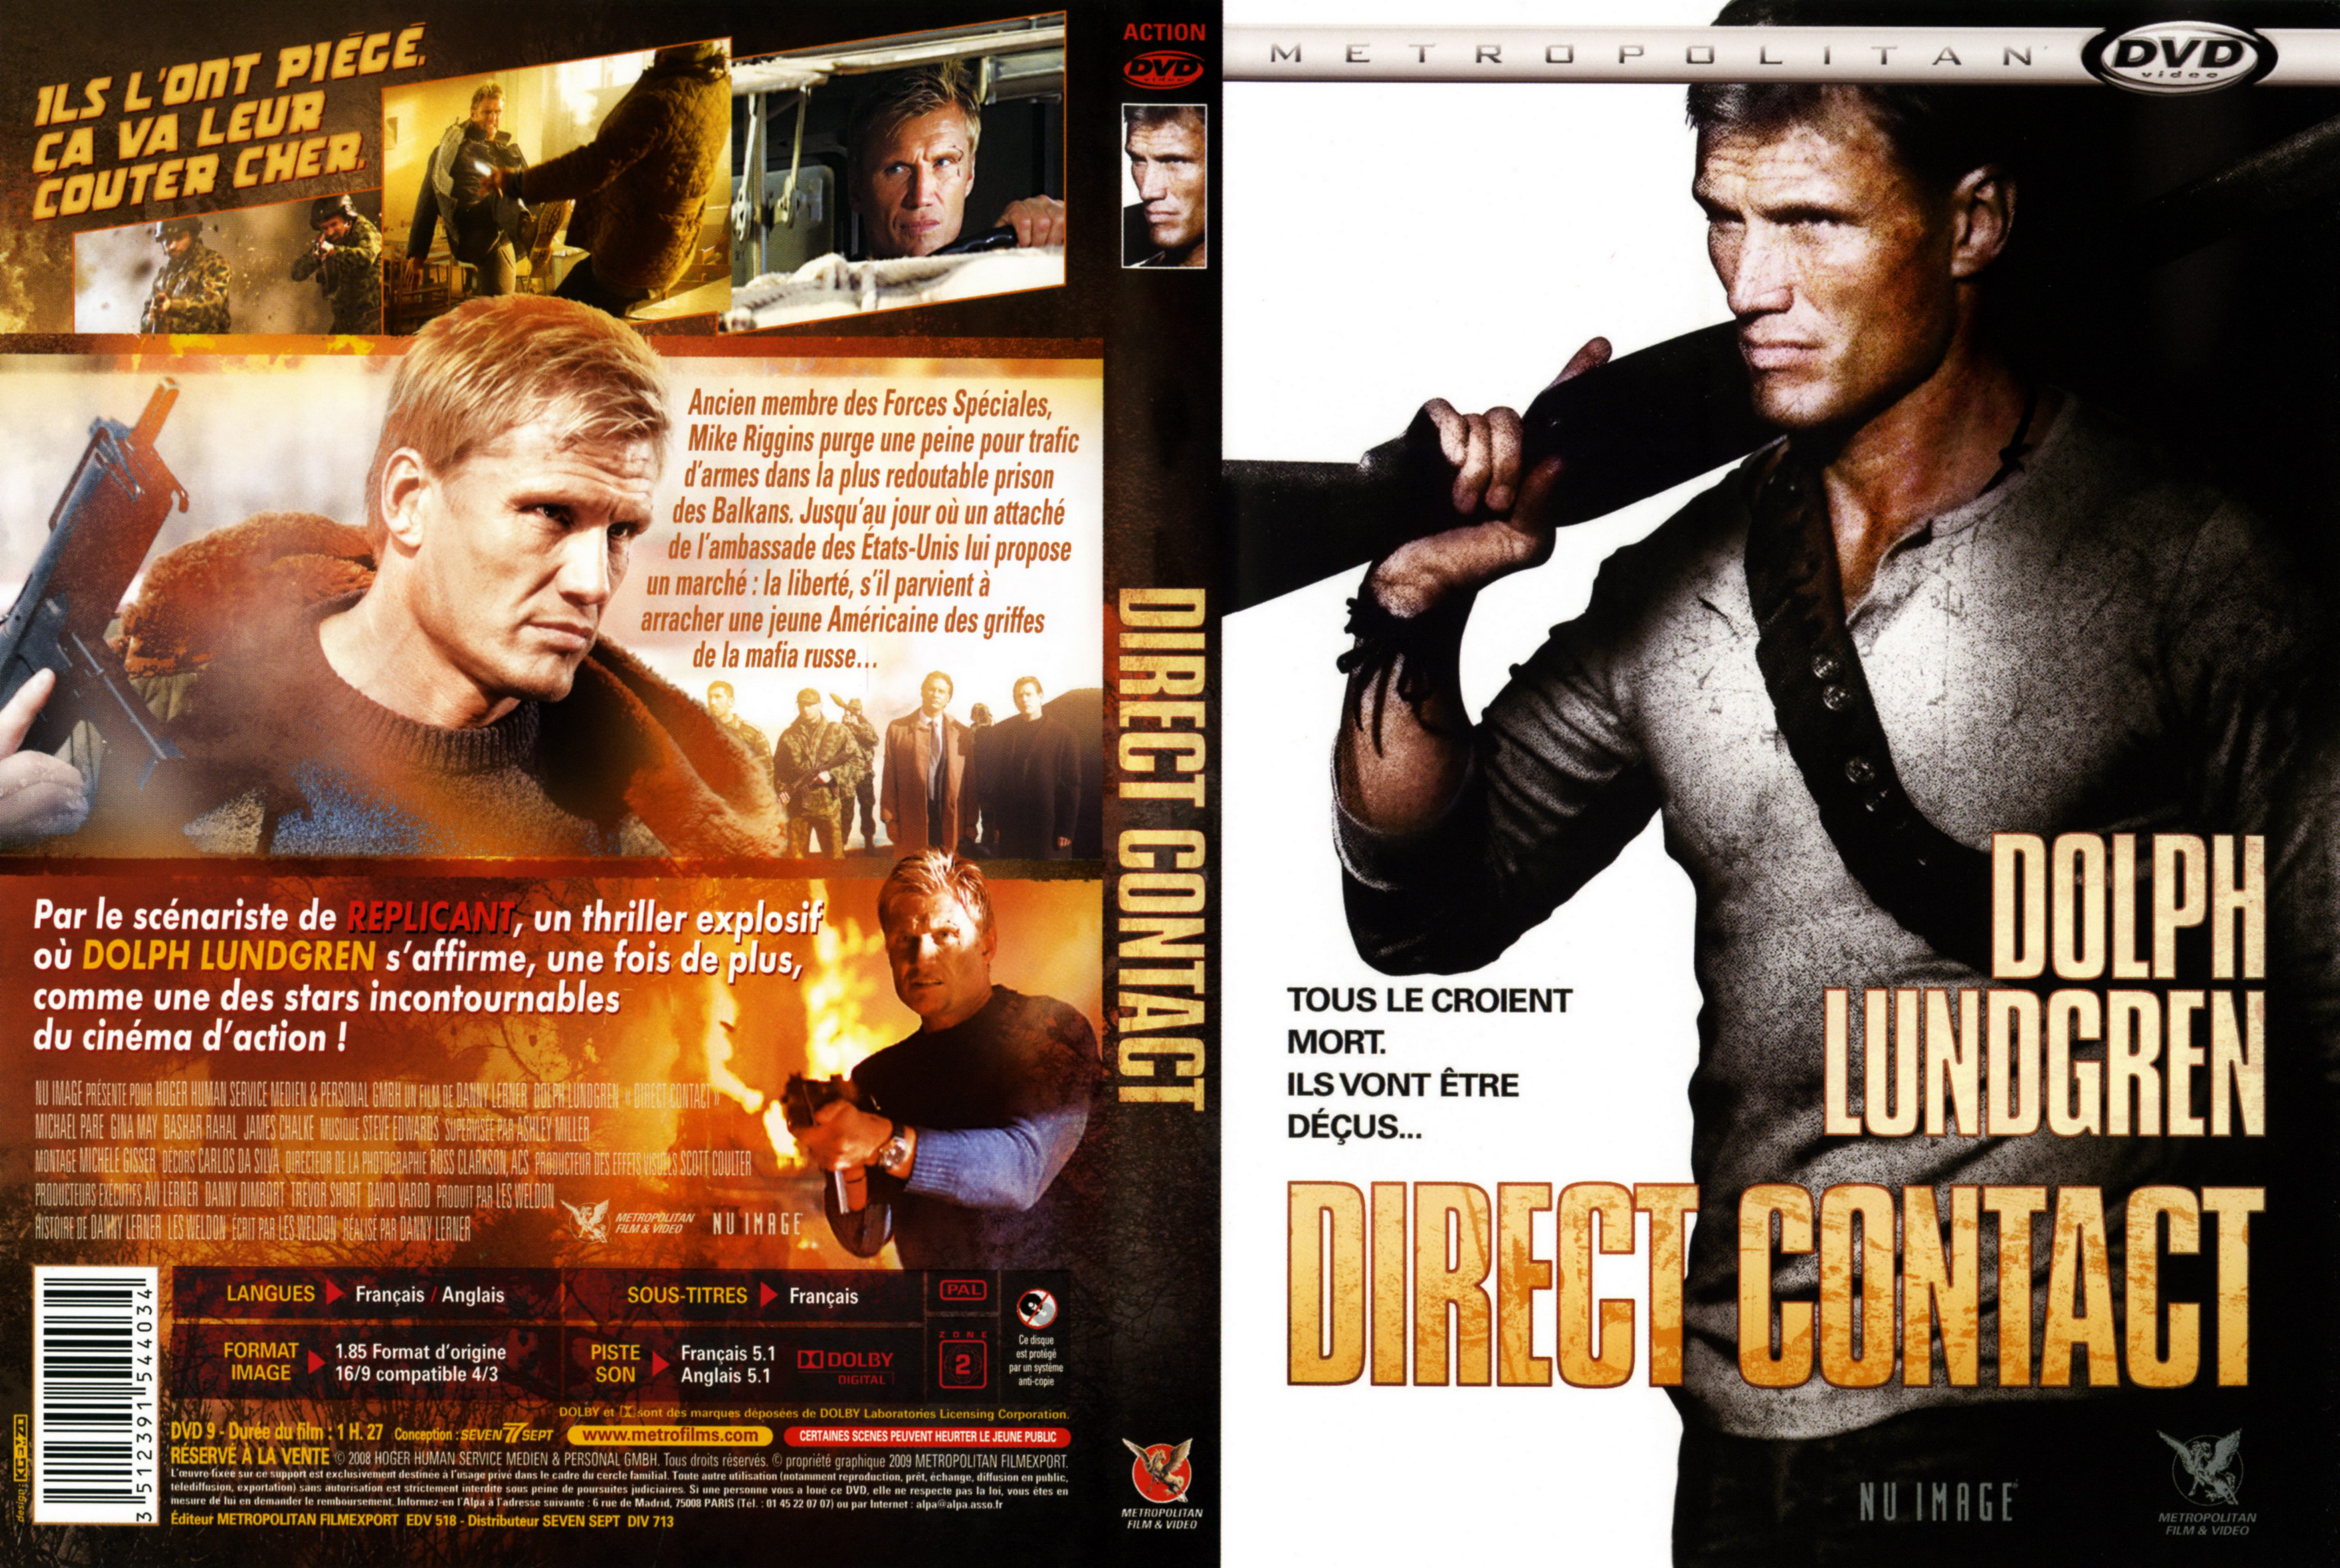 Jaquette DVD Direct contact